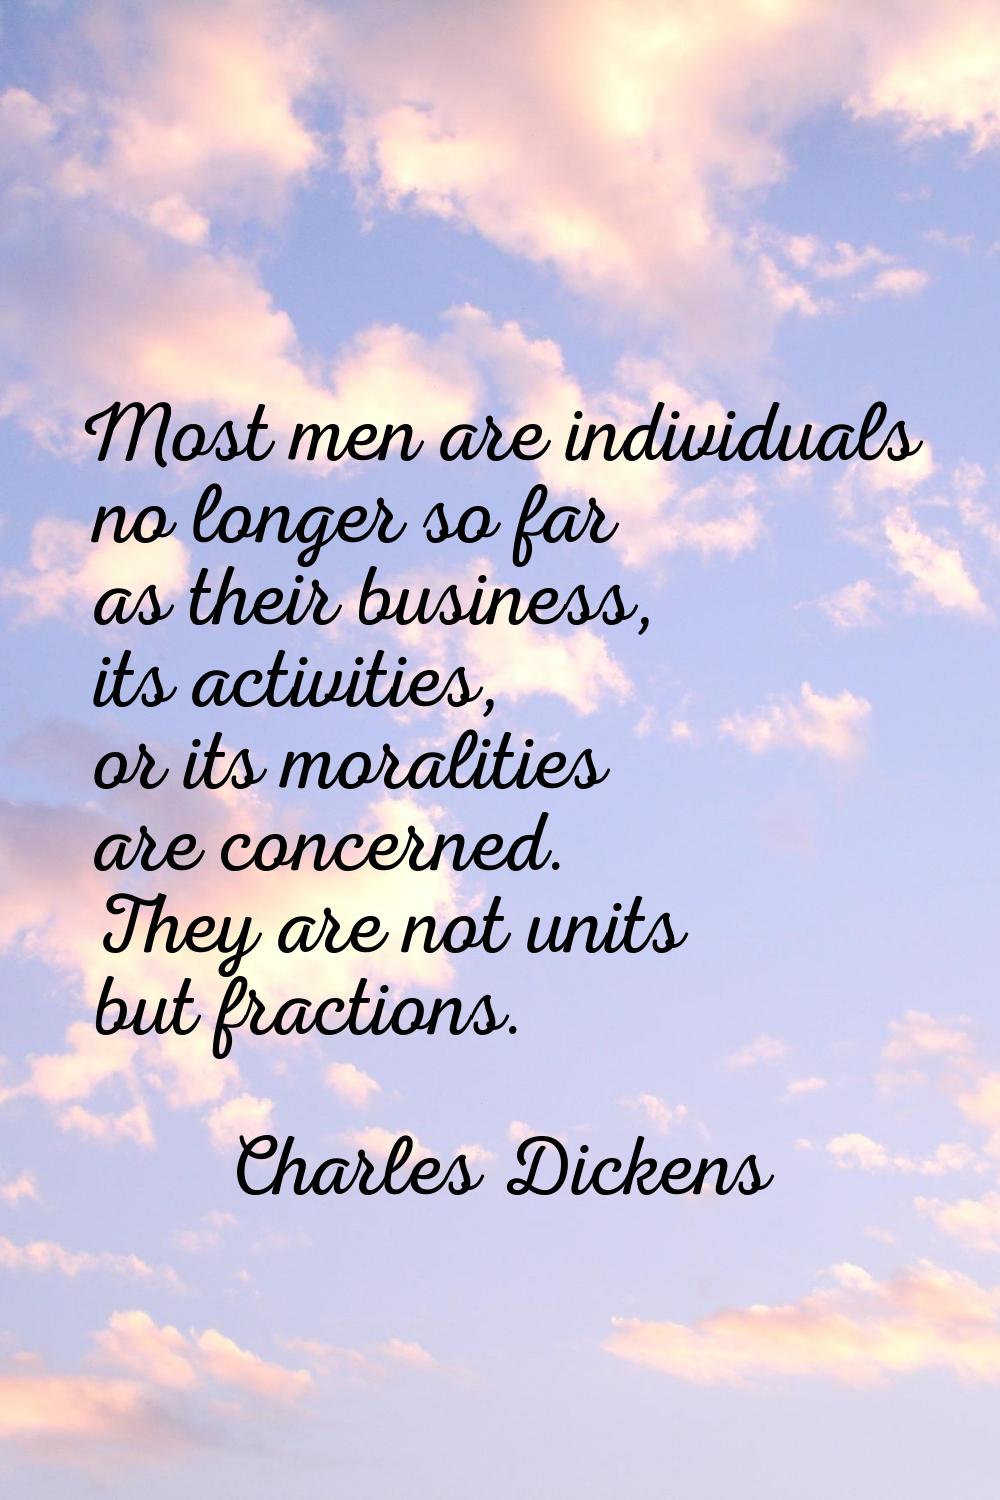 Most men are individuals no longer so far as their business, its activities, or its moralities are 